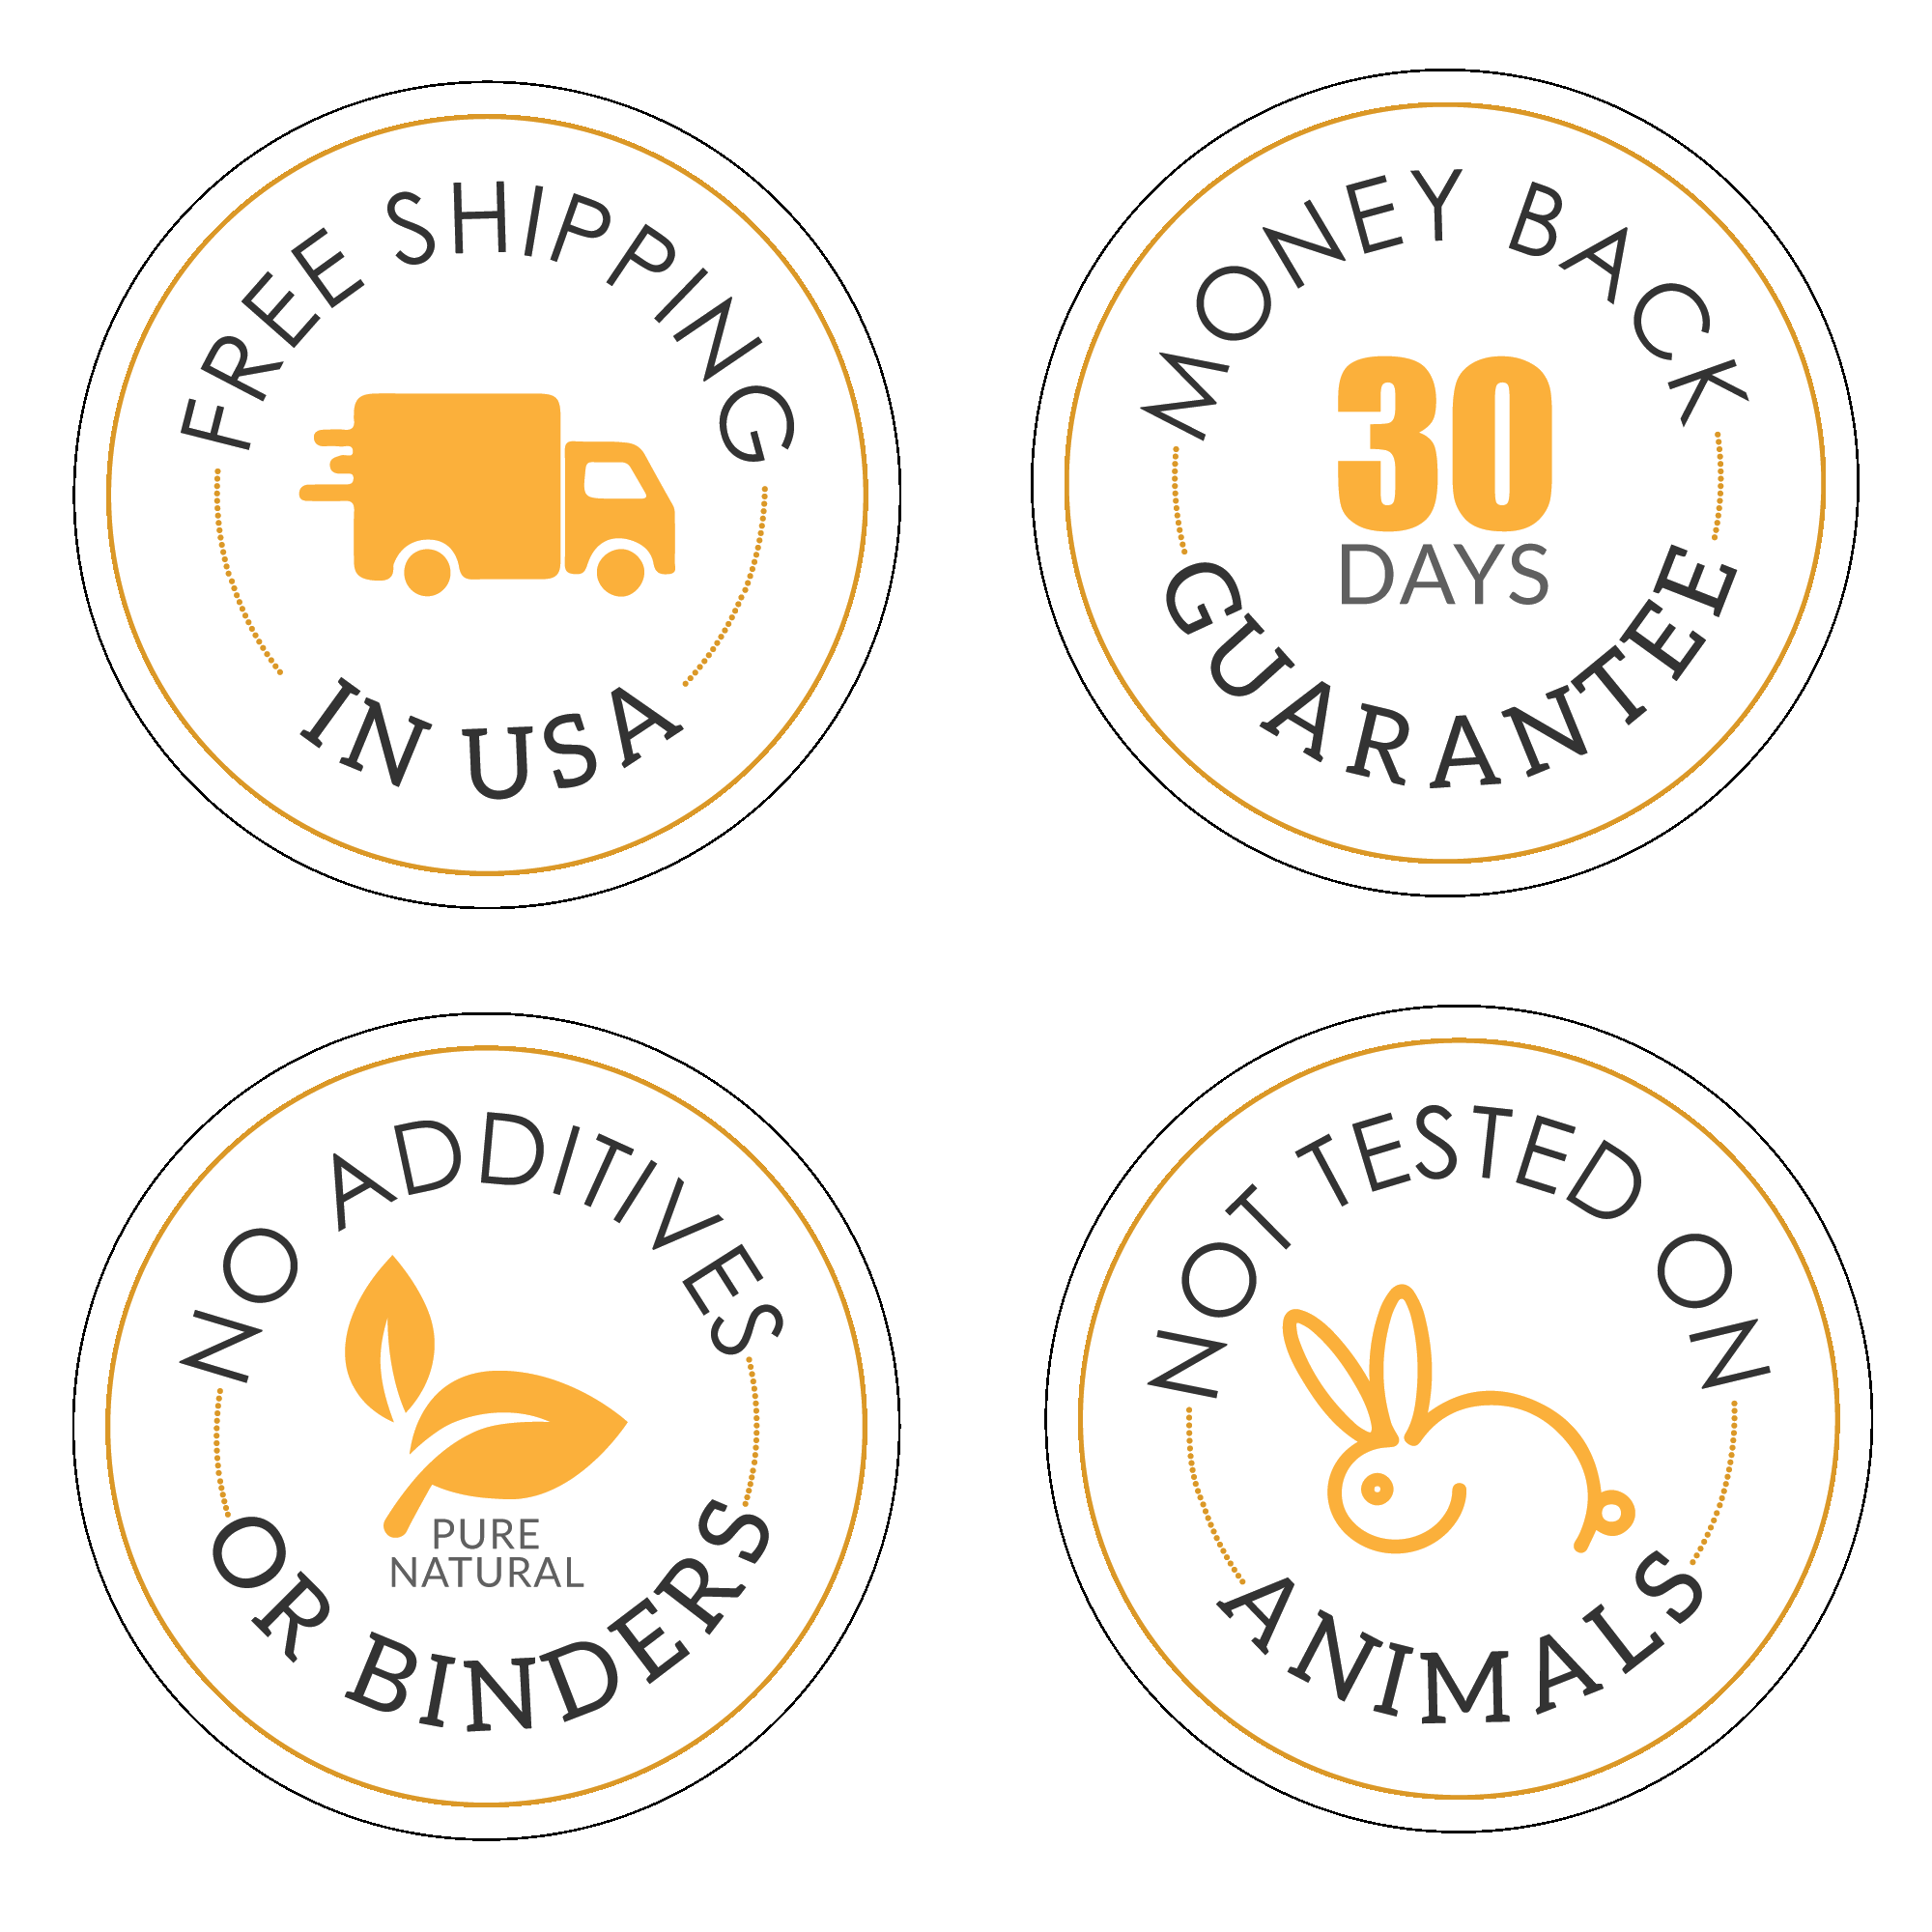 iYURA Trust Badges: 1. Free Shipping 2. 30-Day Money-back Guarantee 3. No Additives or Binders 4. Not Tested on Animals